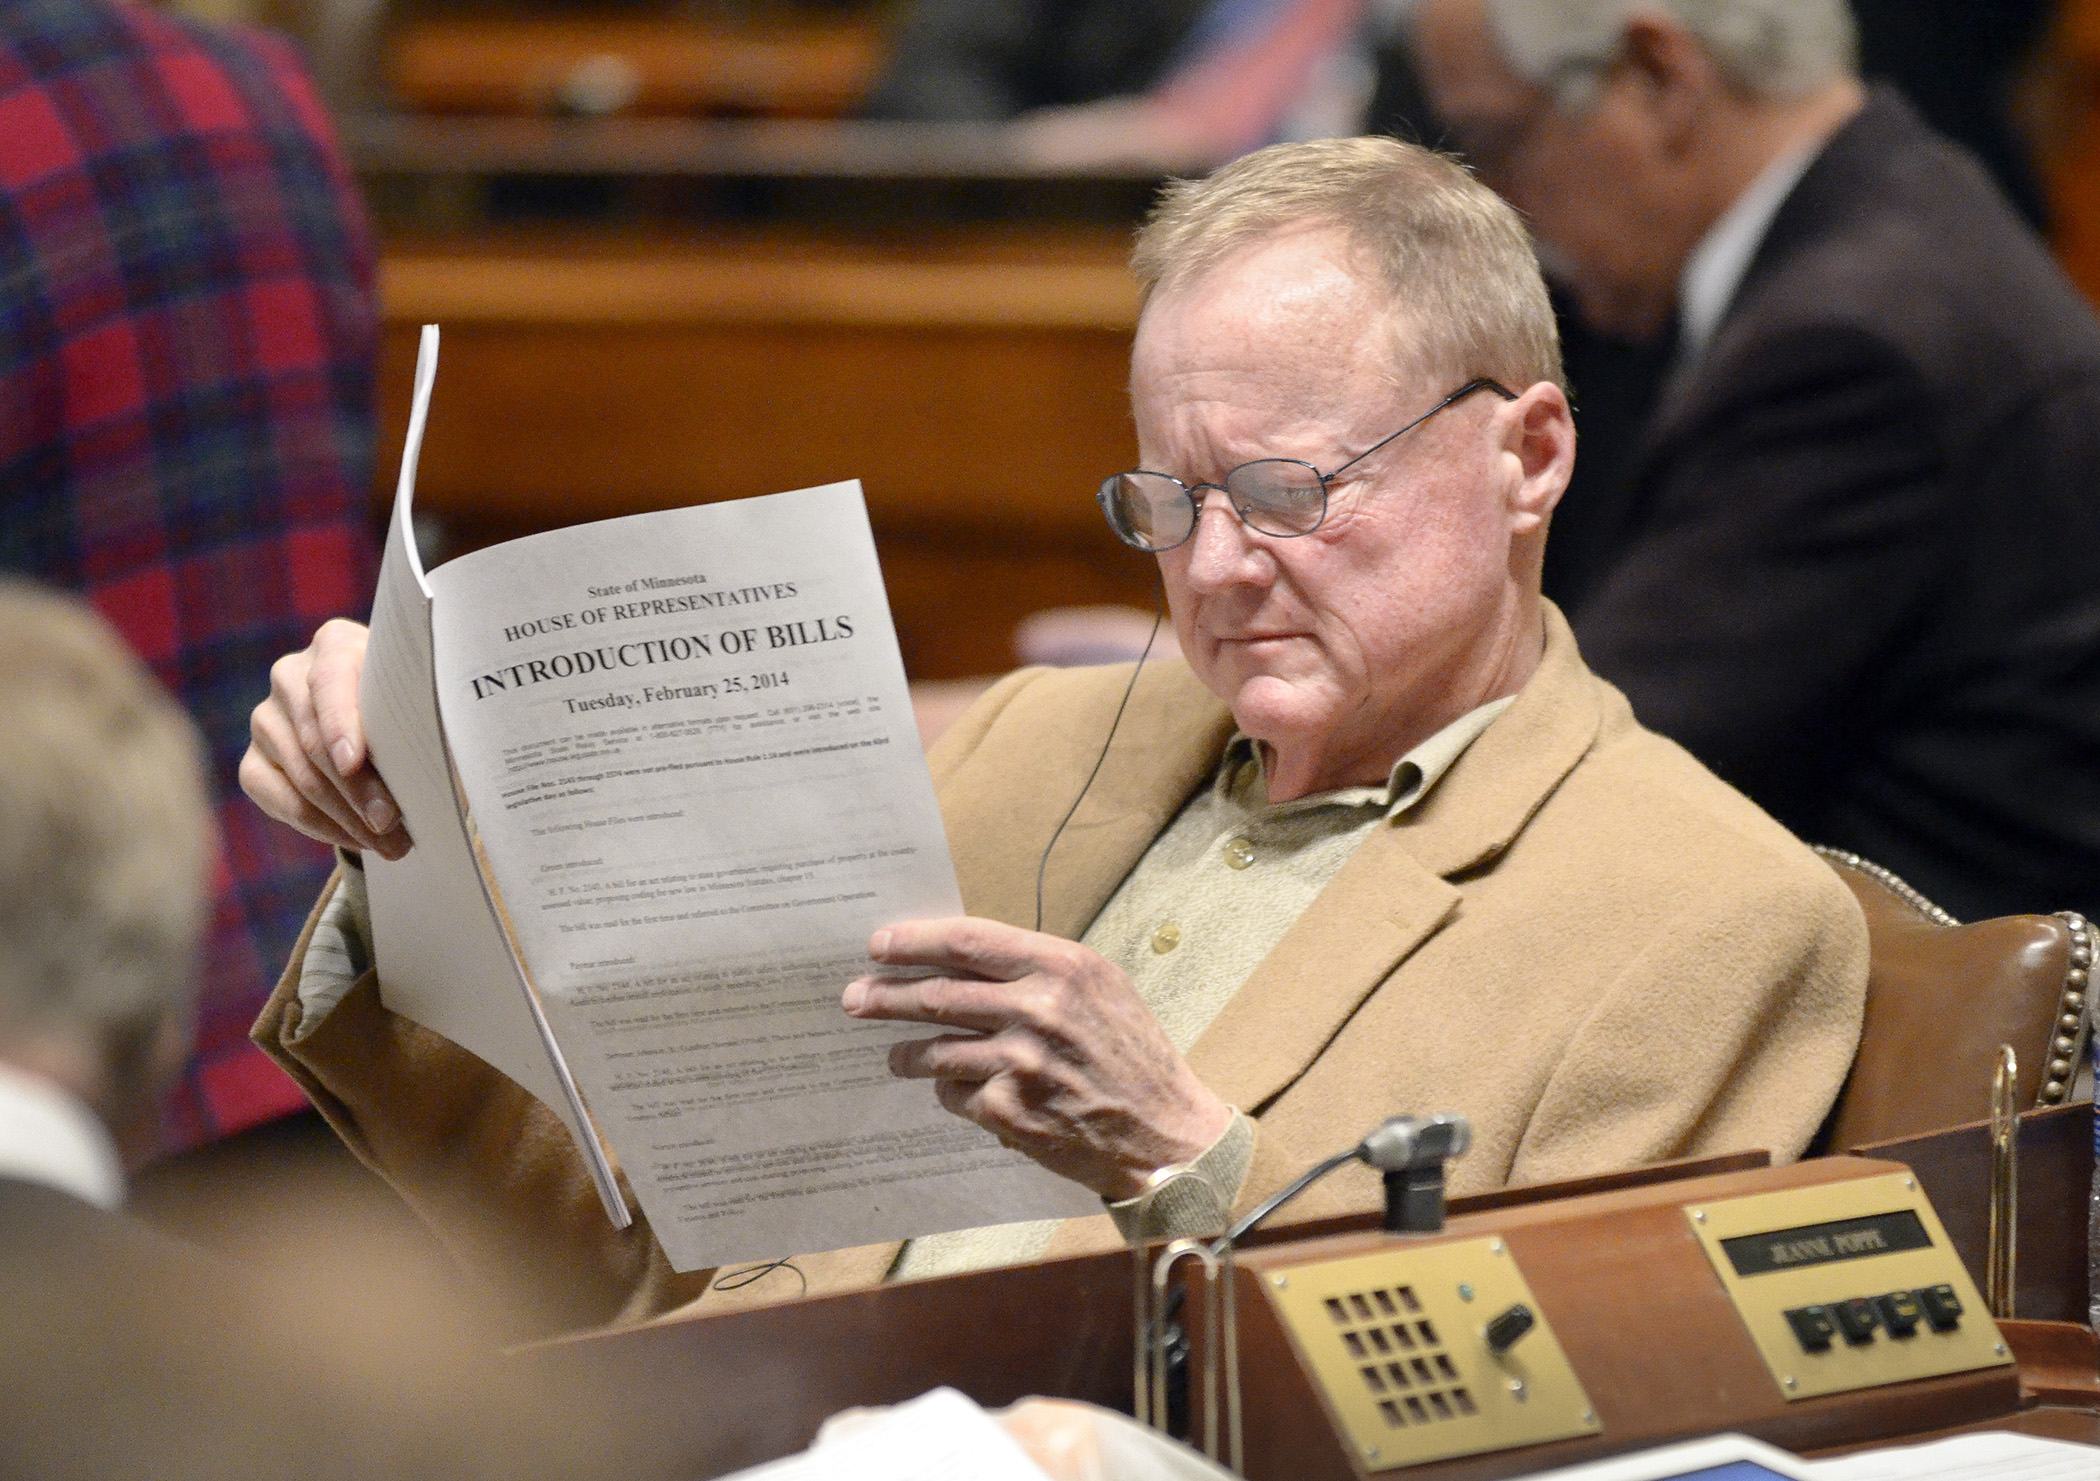 Rep. David Dill checks out the day's bill introductions during the 2014 session. Photo by Andrew VonBank